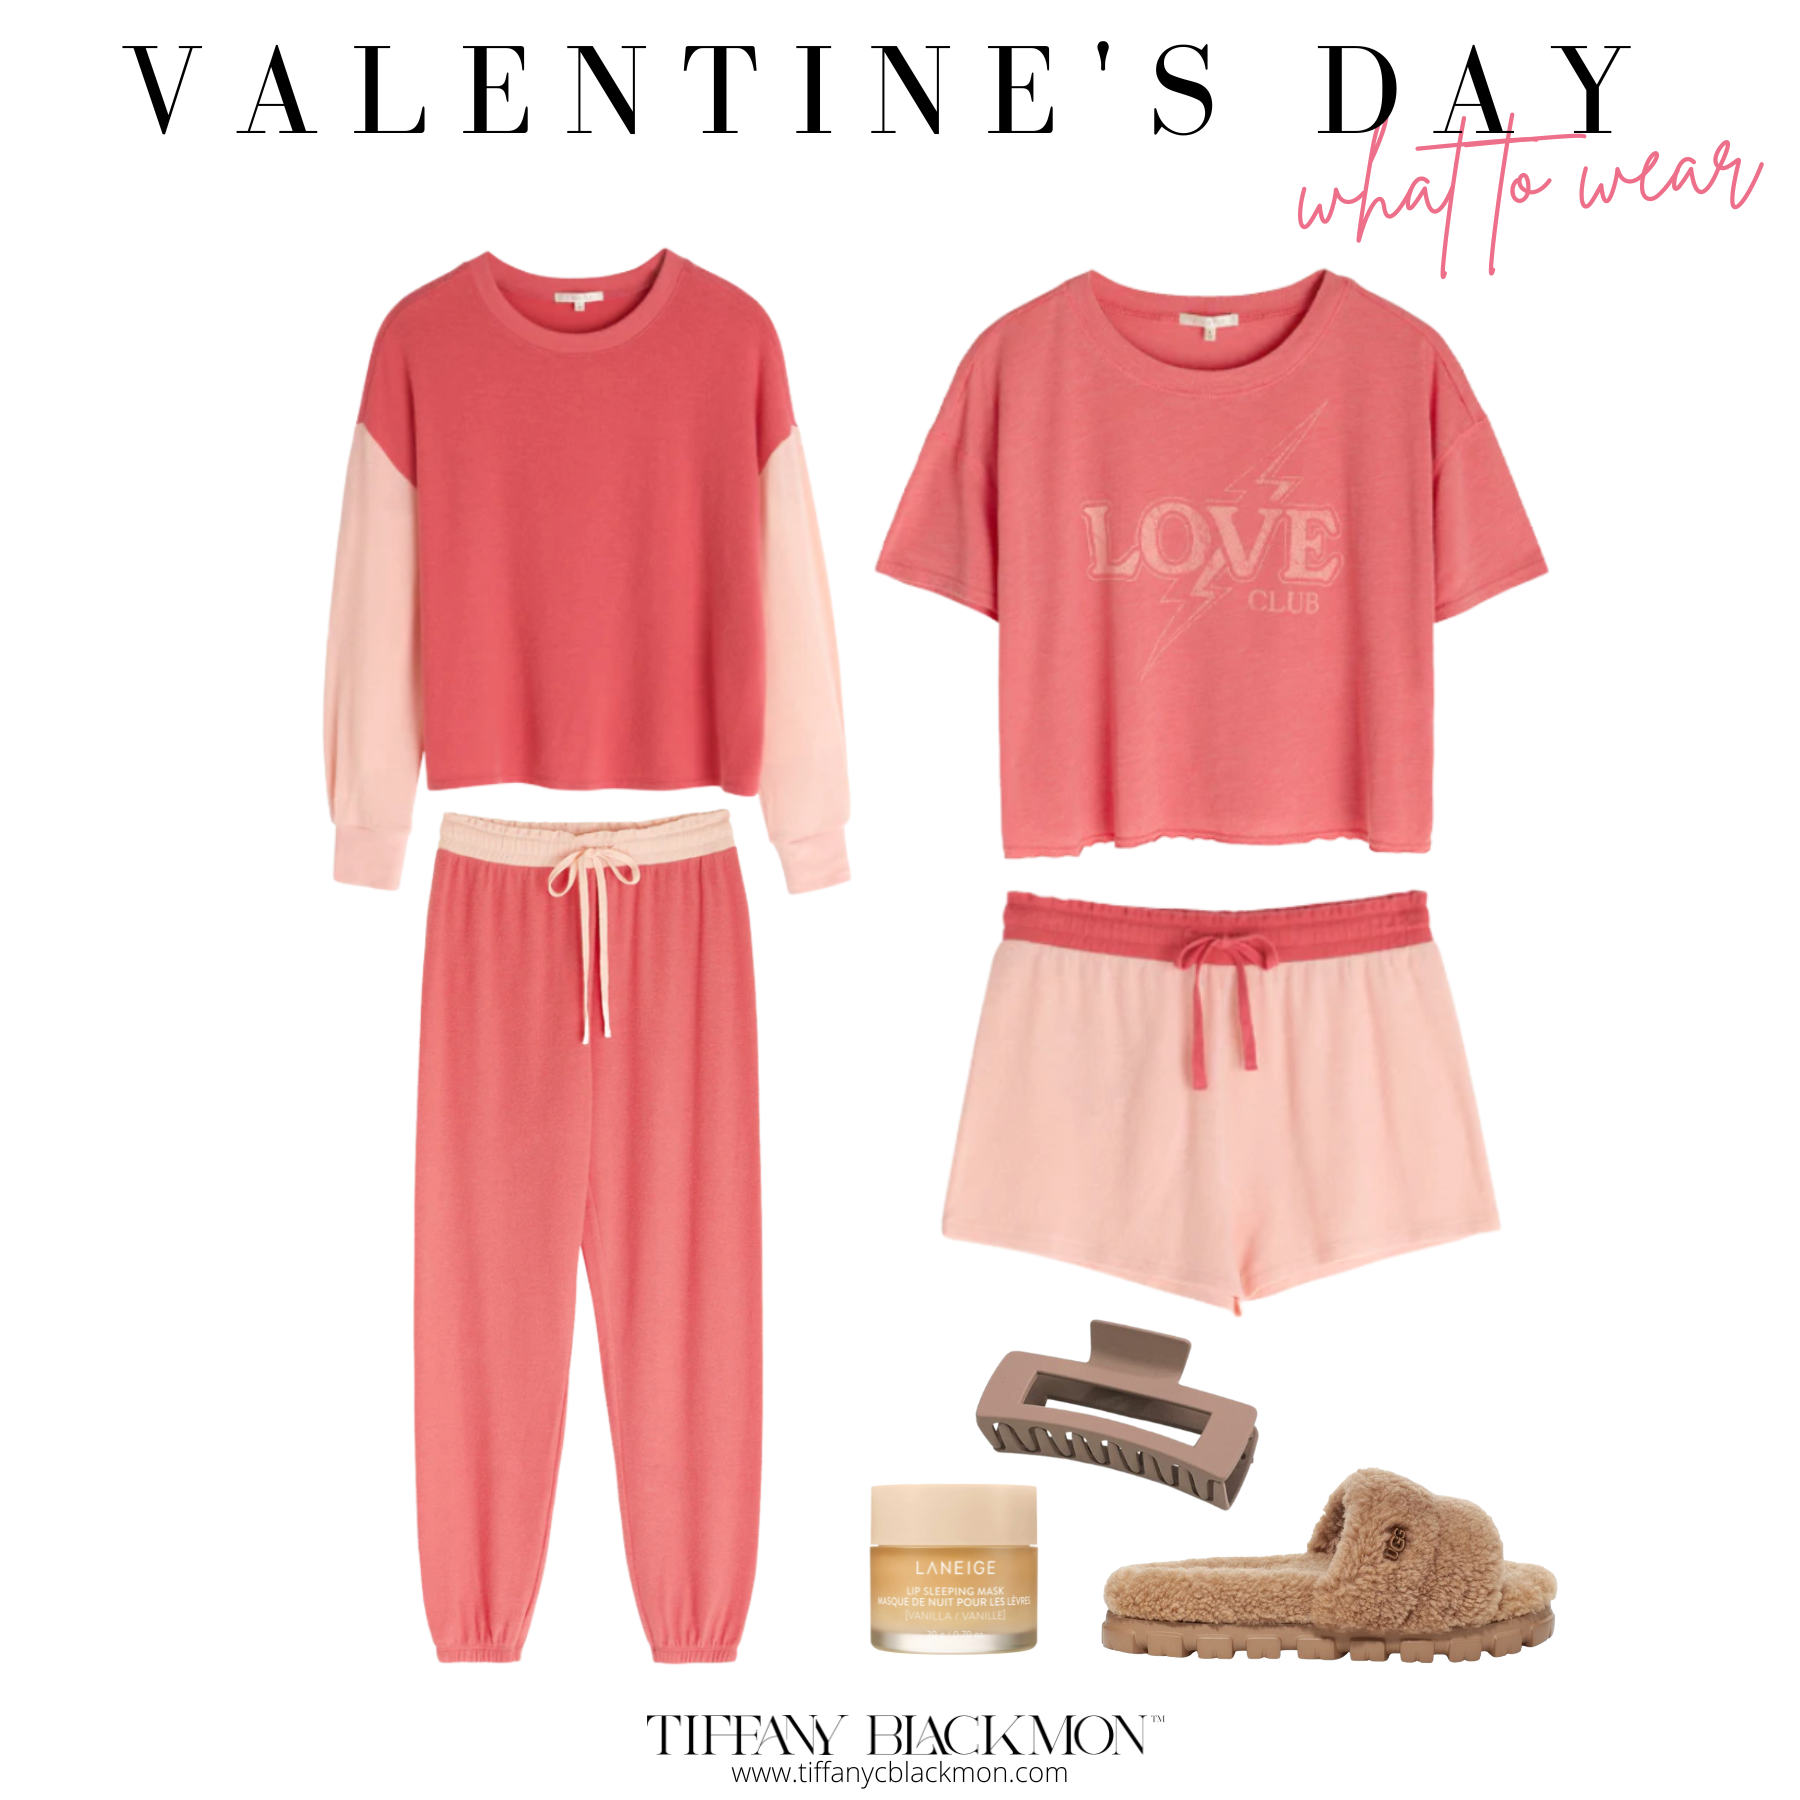 Valentine's Day: What to Wear
#loungewear #lounge #pjs #pajamas #valentinesday #datenight #cozy #everydaystyle #casualoutfits